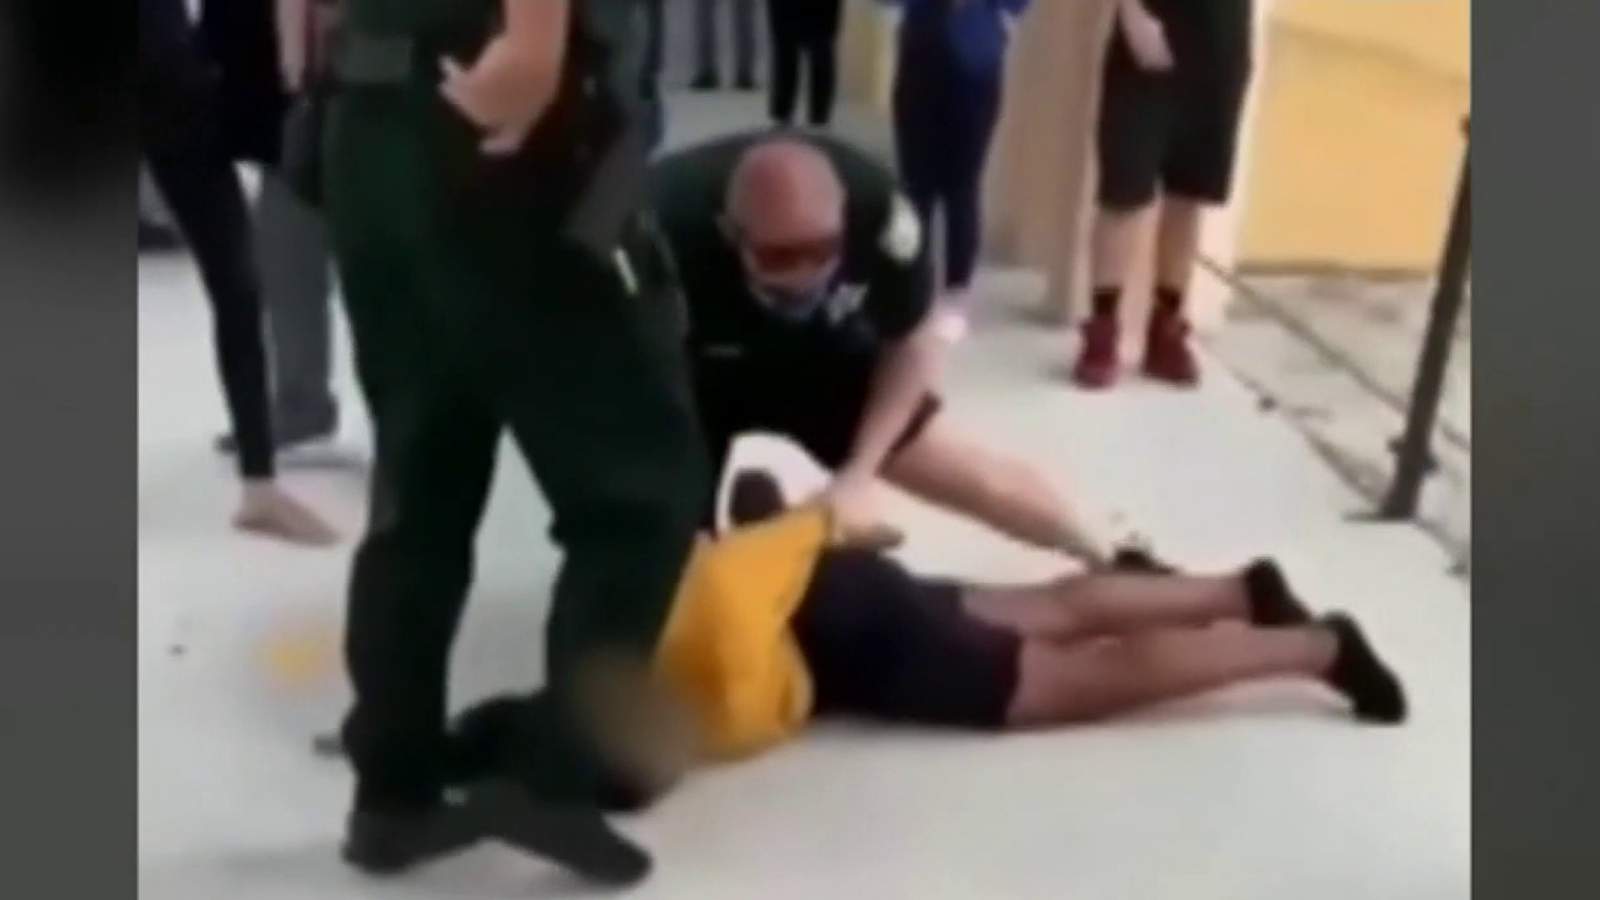 Injunctions filed against girl who was slammed by deputy at Liberty High School